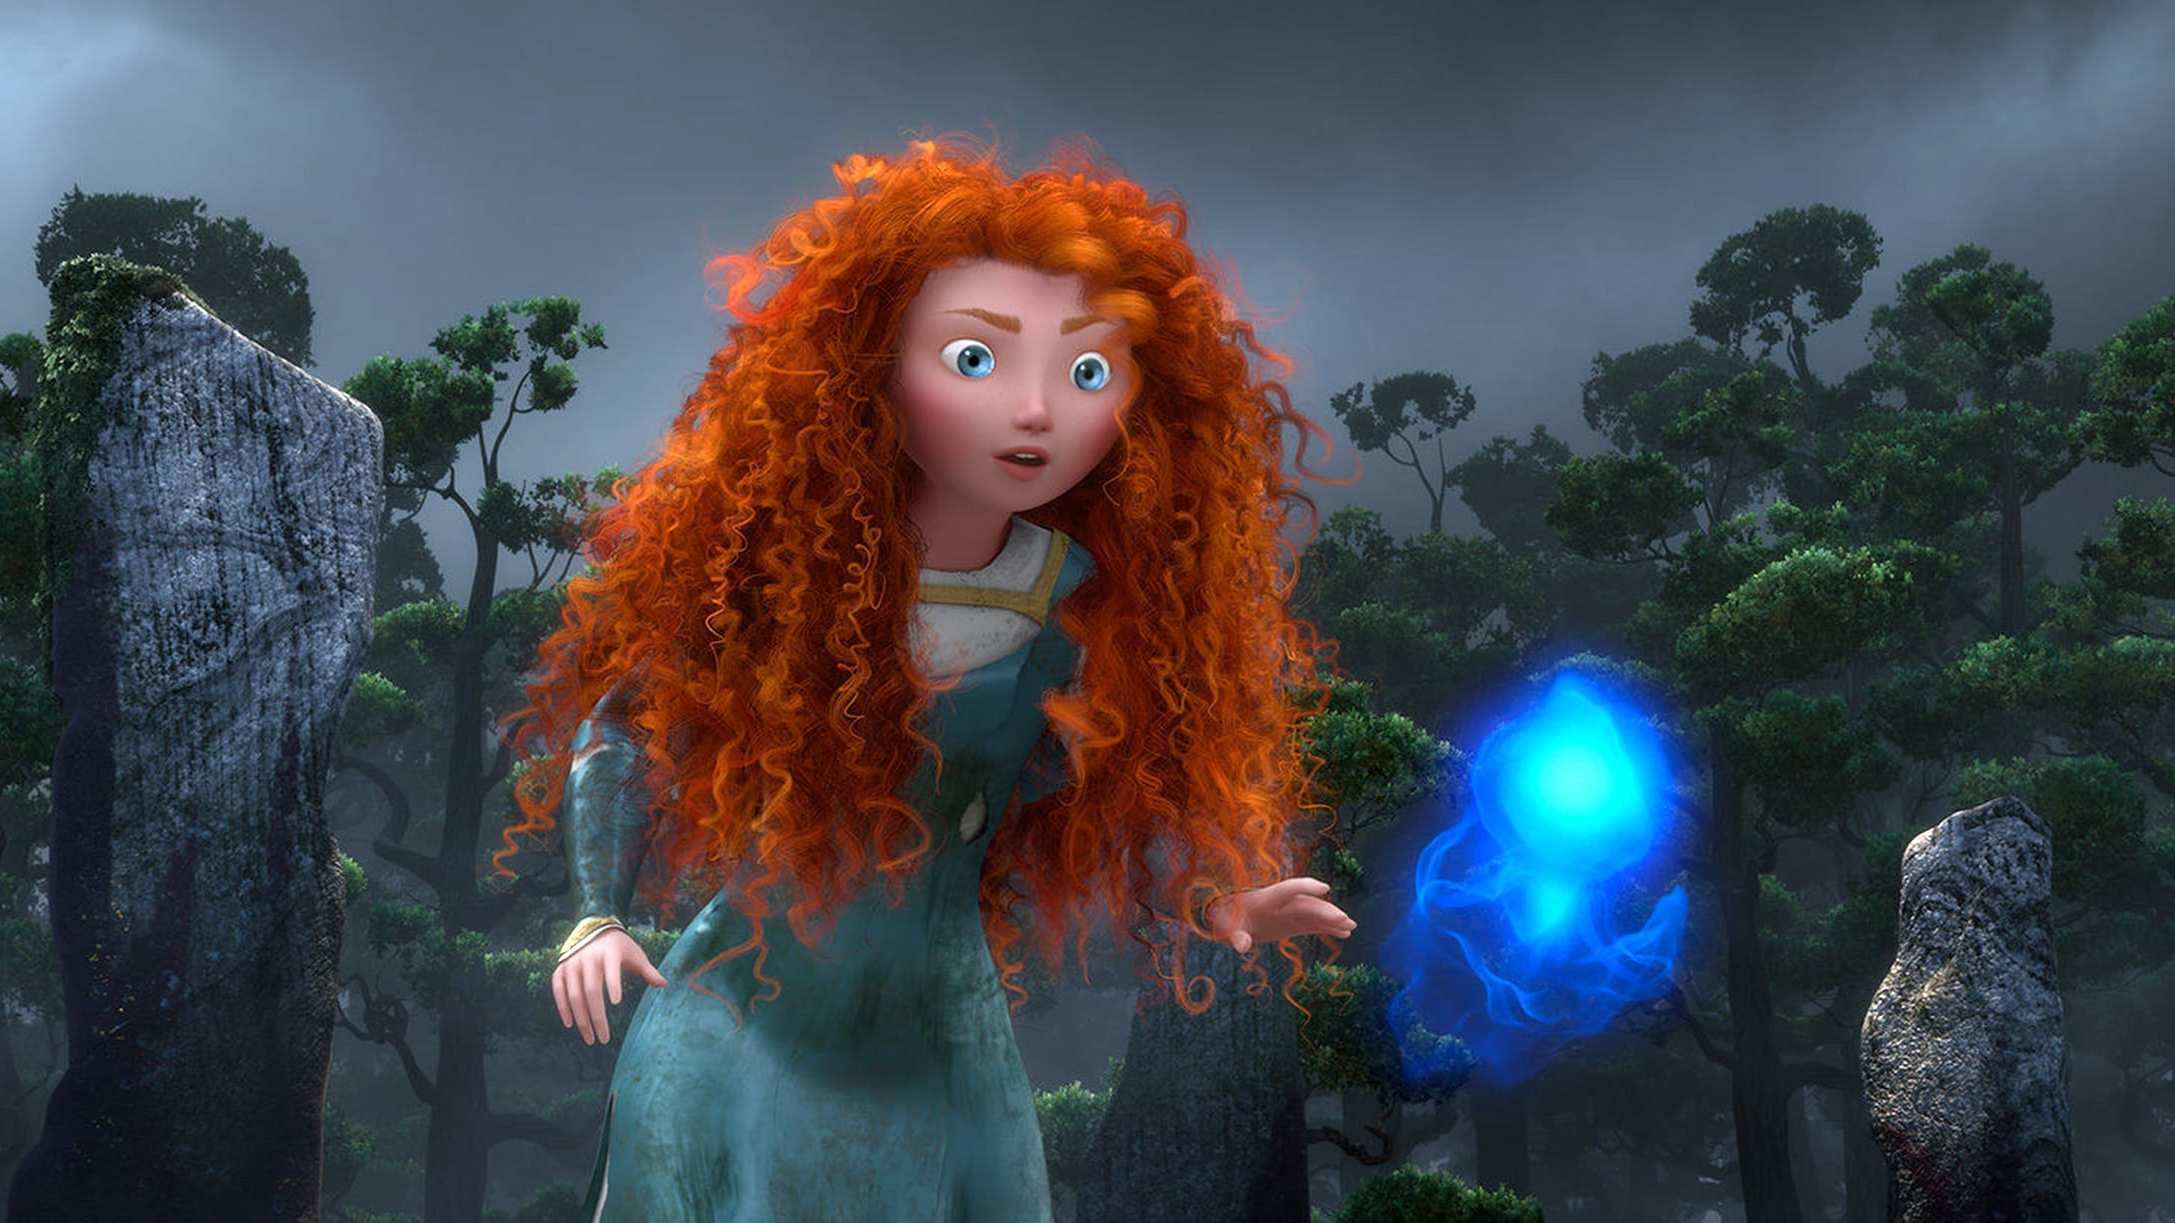 Merida spotting a Wisp in the forest.